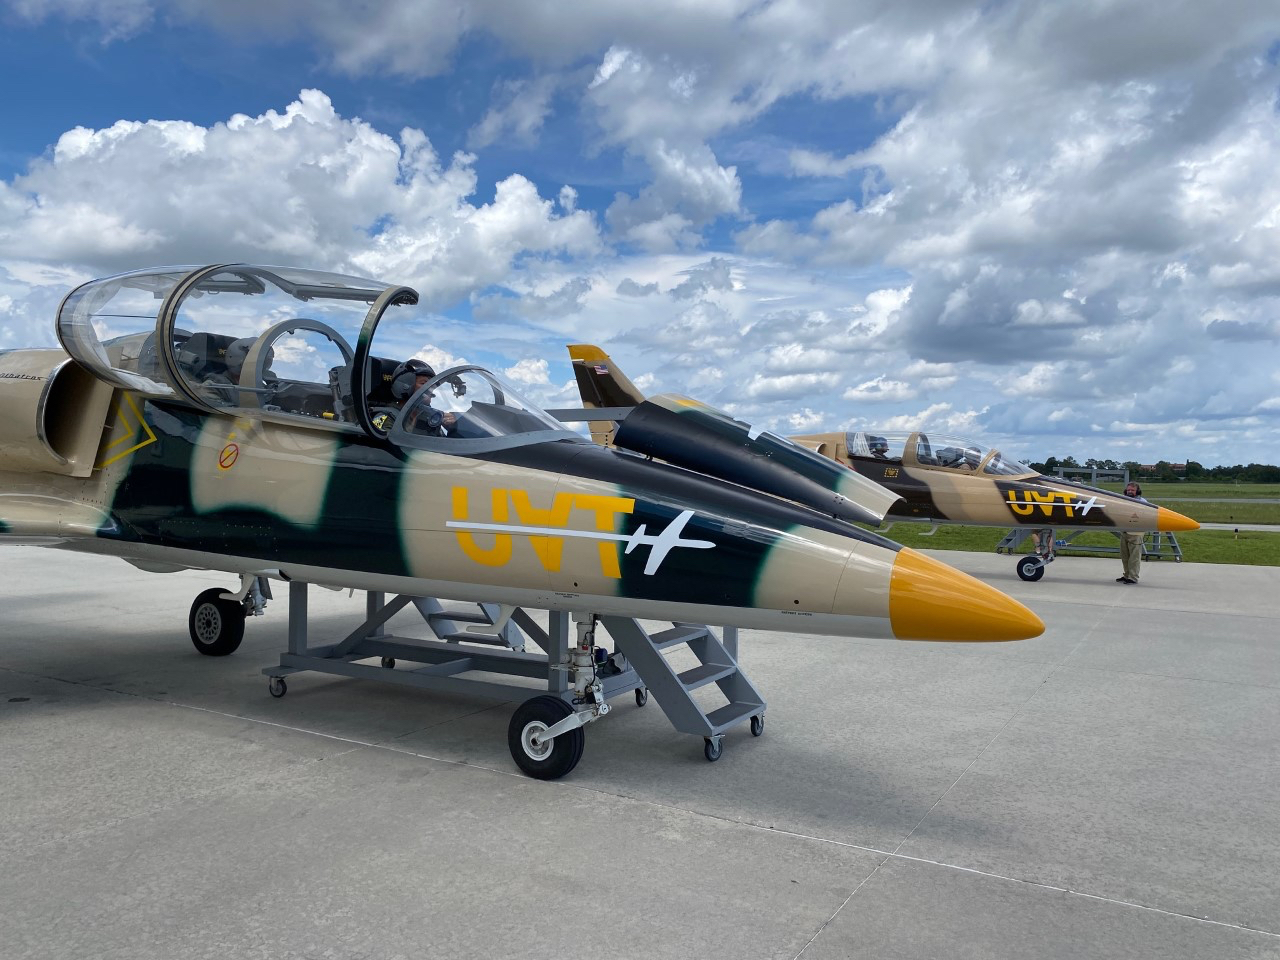 Uat Adds Another L-39 To Their Upset Prevention And Recovery Training  Program - Stallion 51